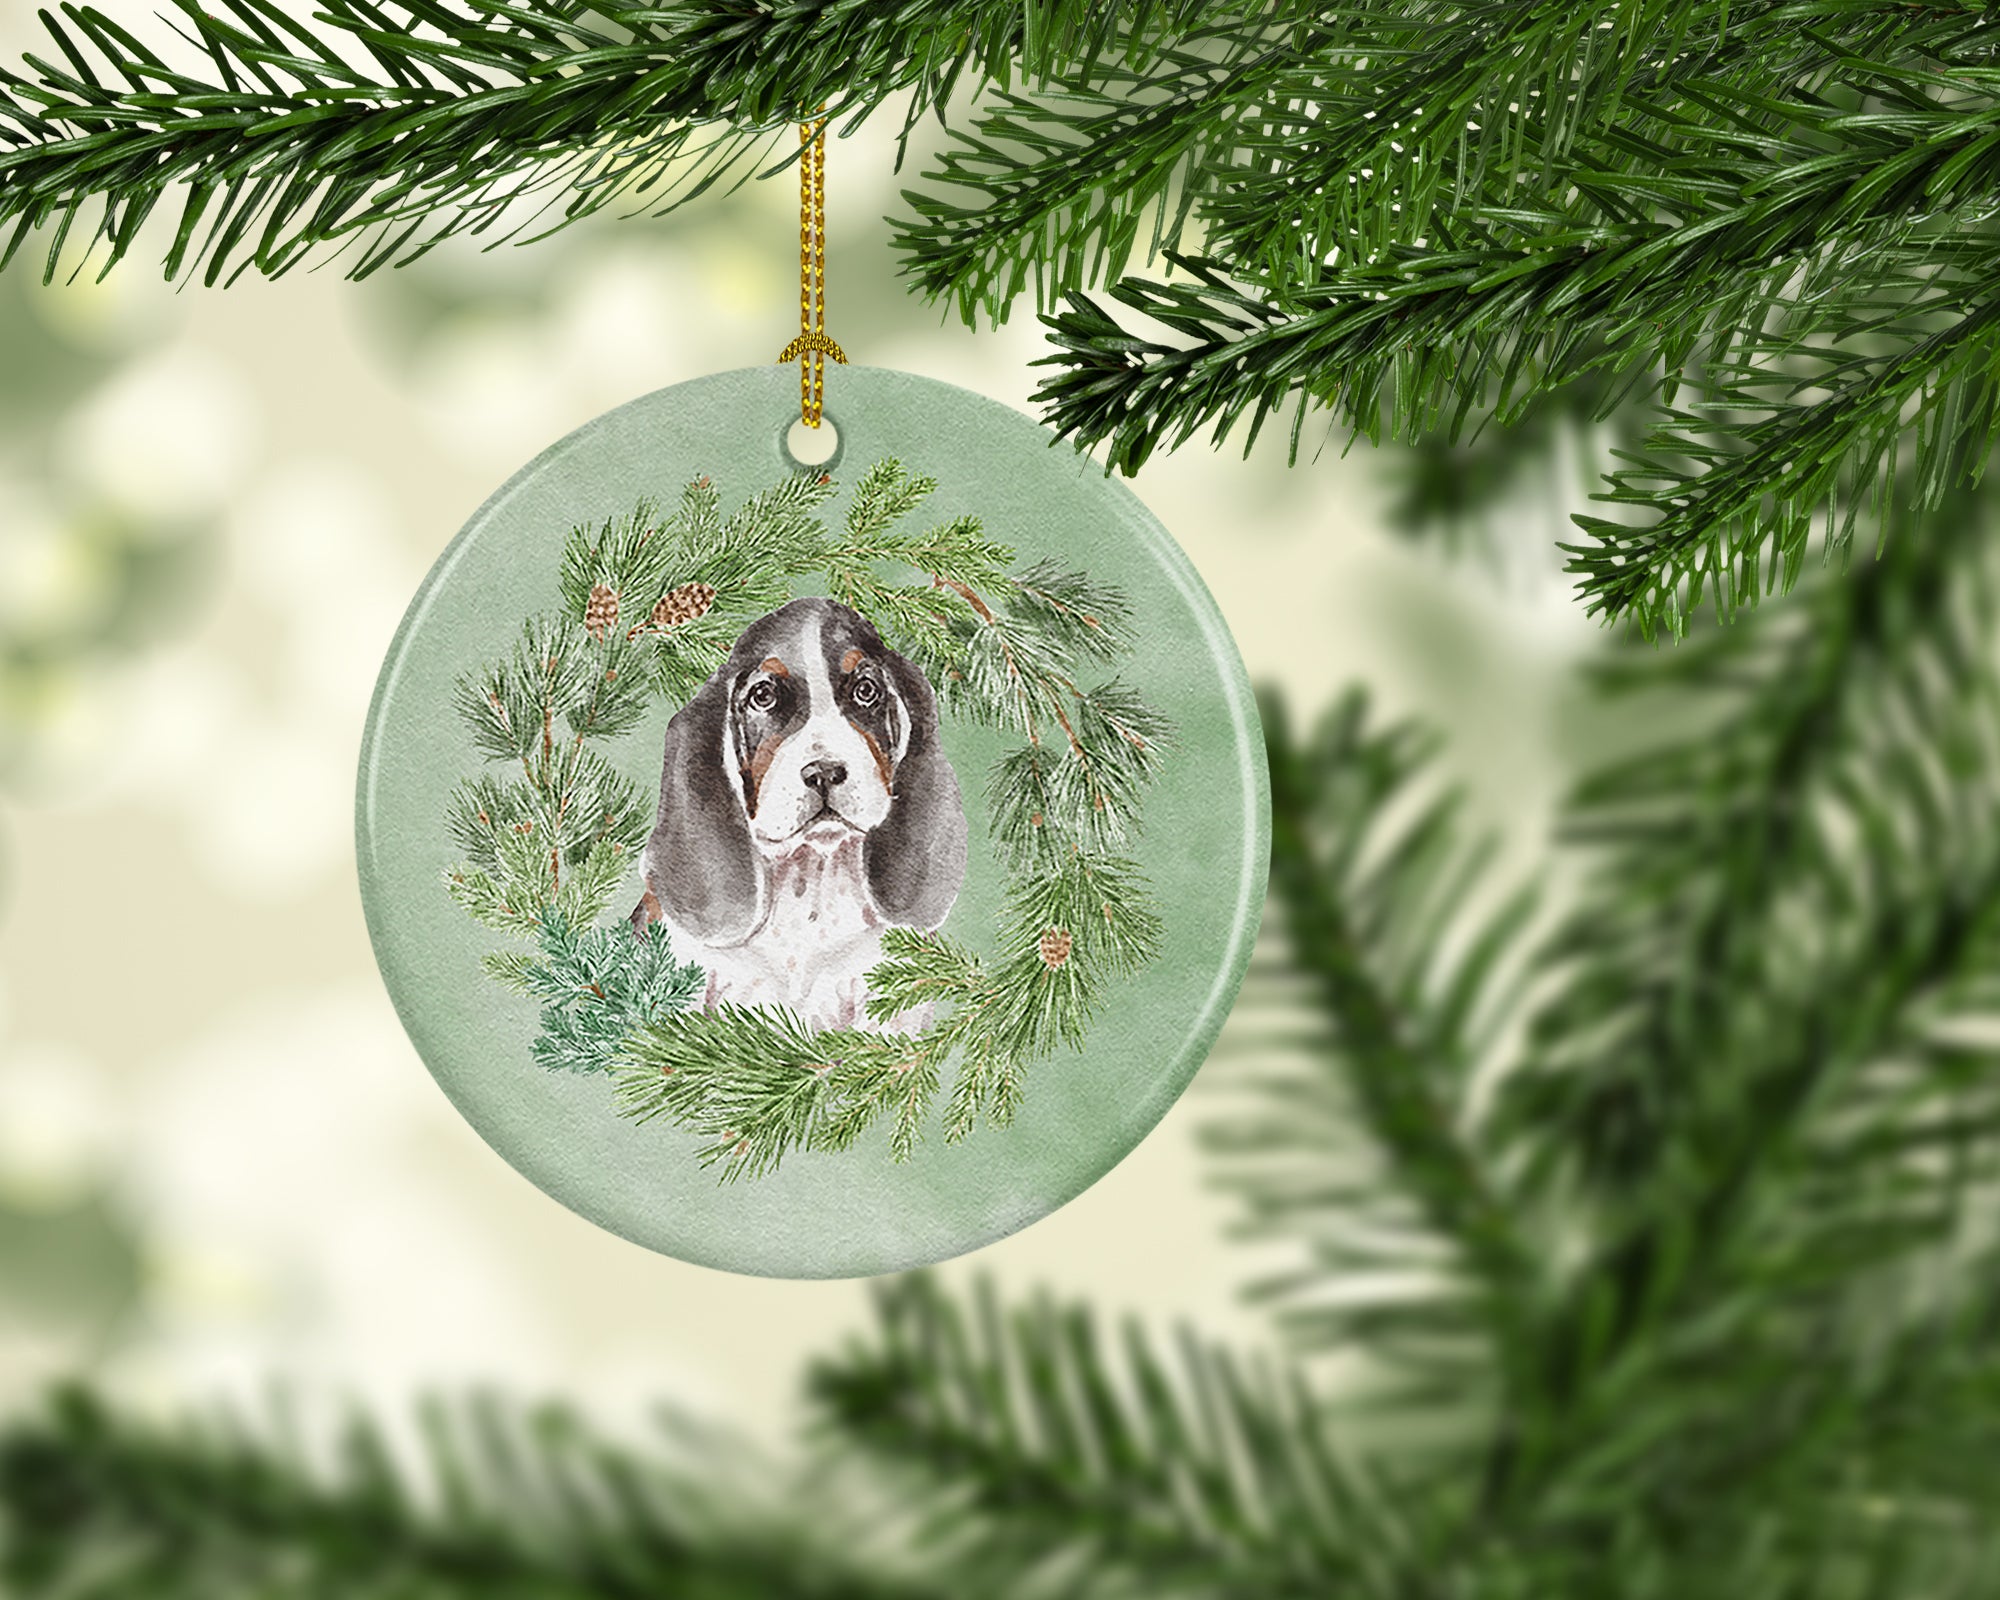 Buy this Basset Hound Puppy Tricolor Christmas Wreath Ceramic Ornament